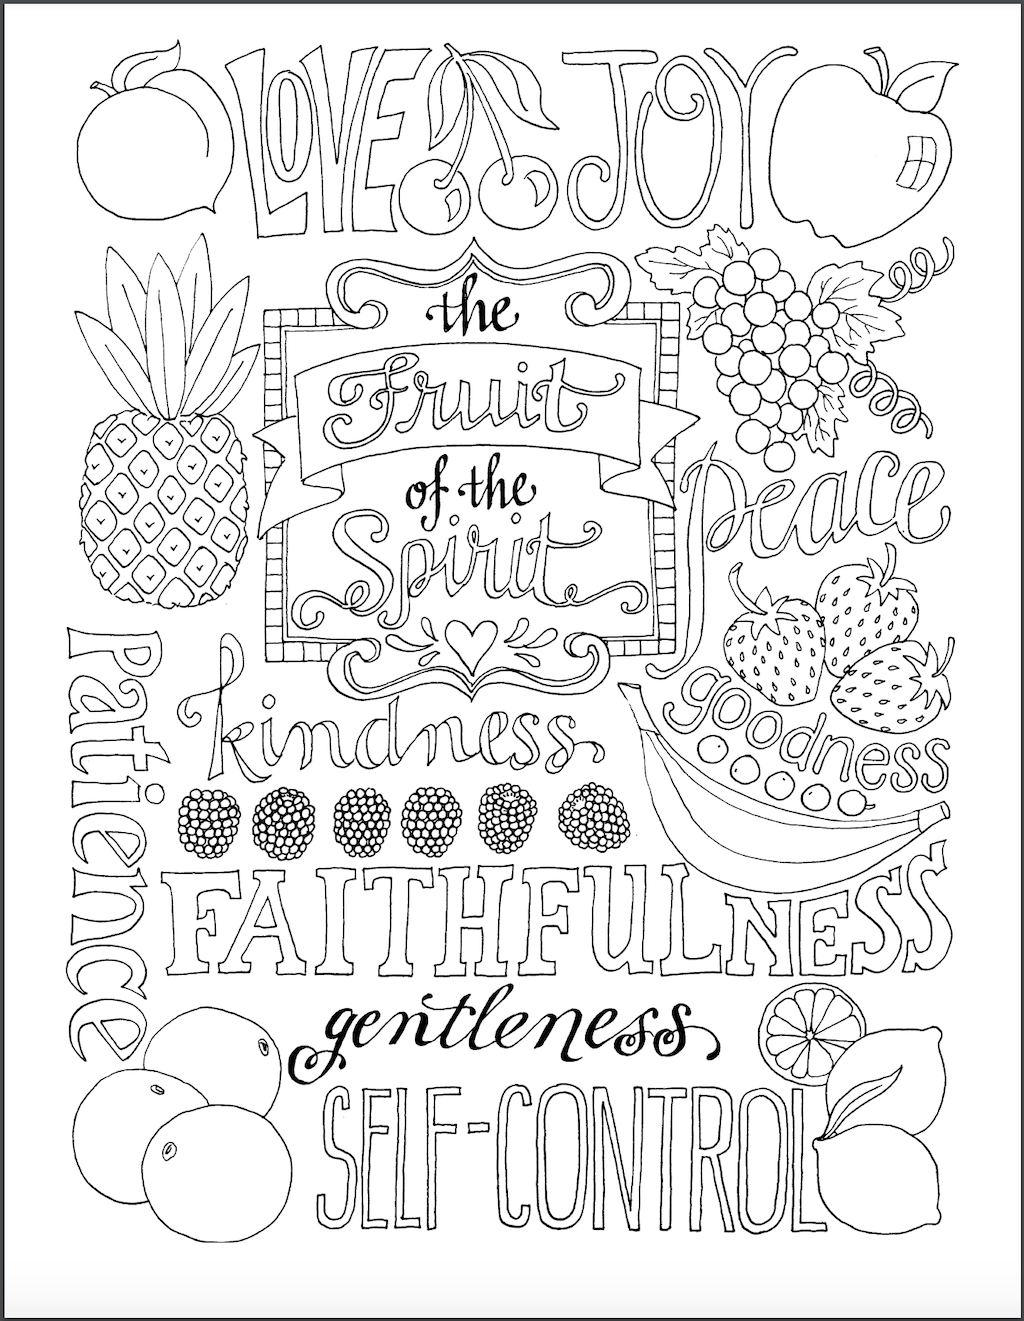 fruit-of-the-spirit-coloring-page-flanders-family-homelife